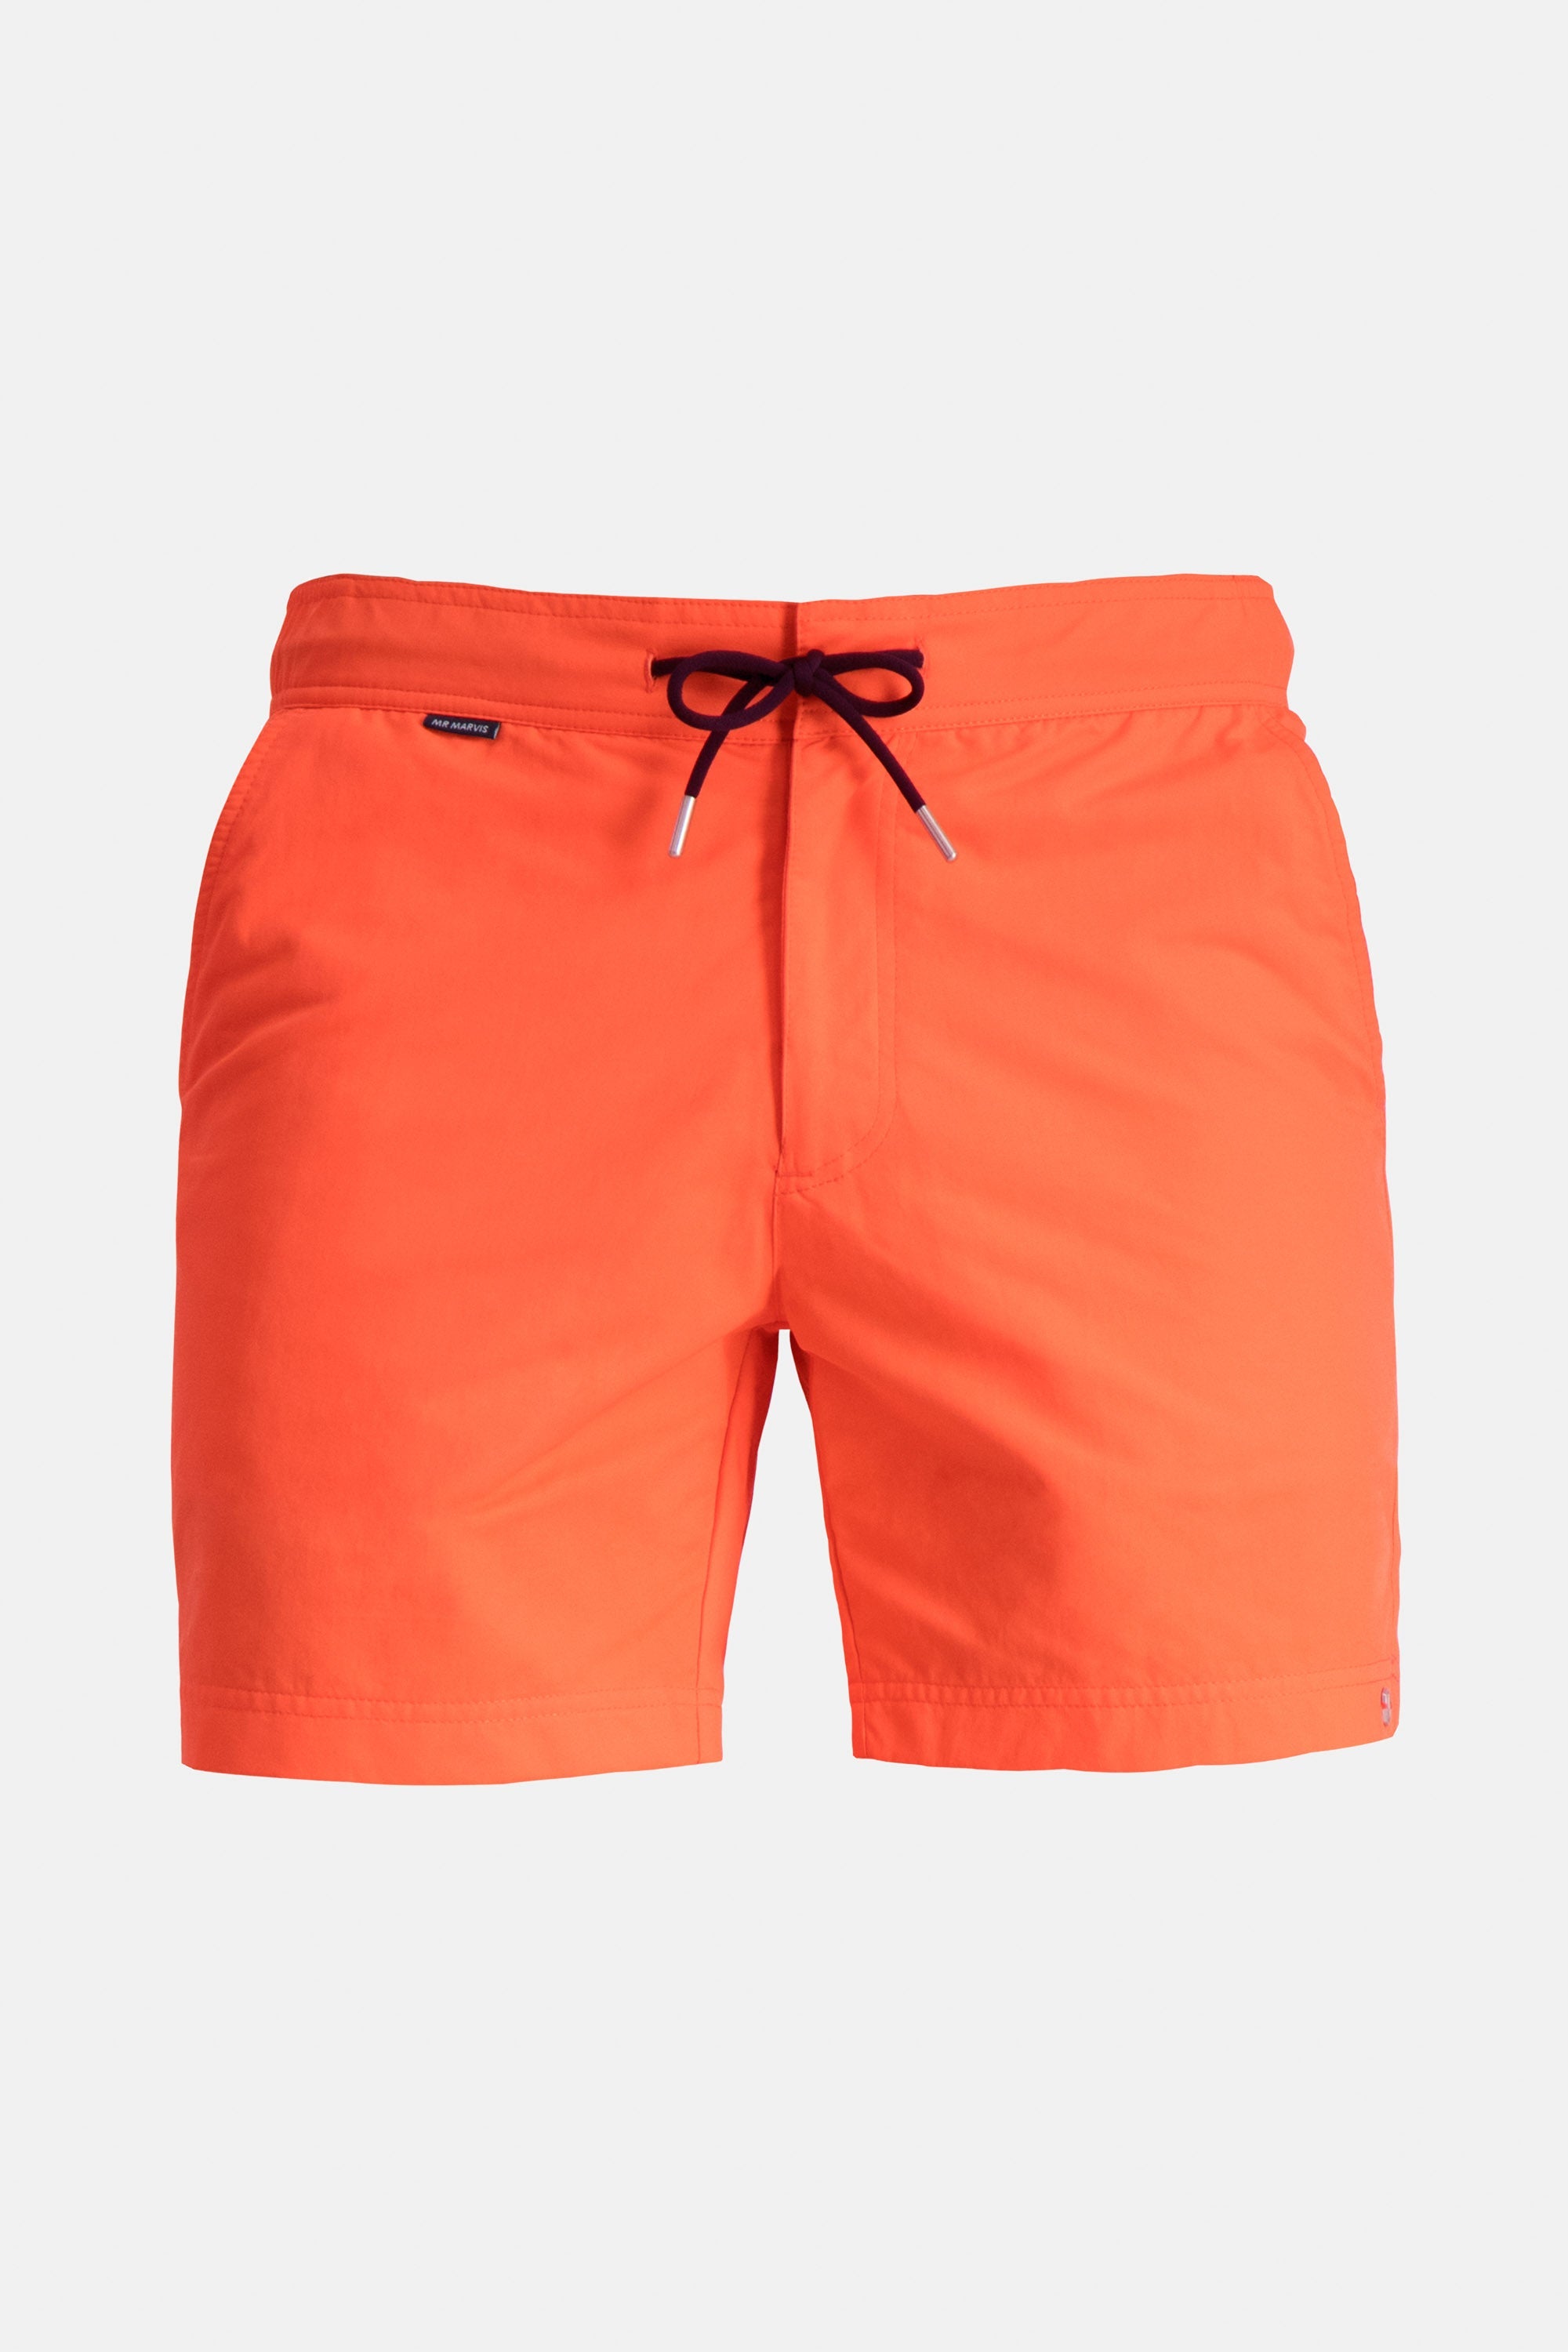 The Sunsets | MR MARVIS Shorts | Bright Coral | Swim